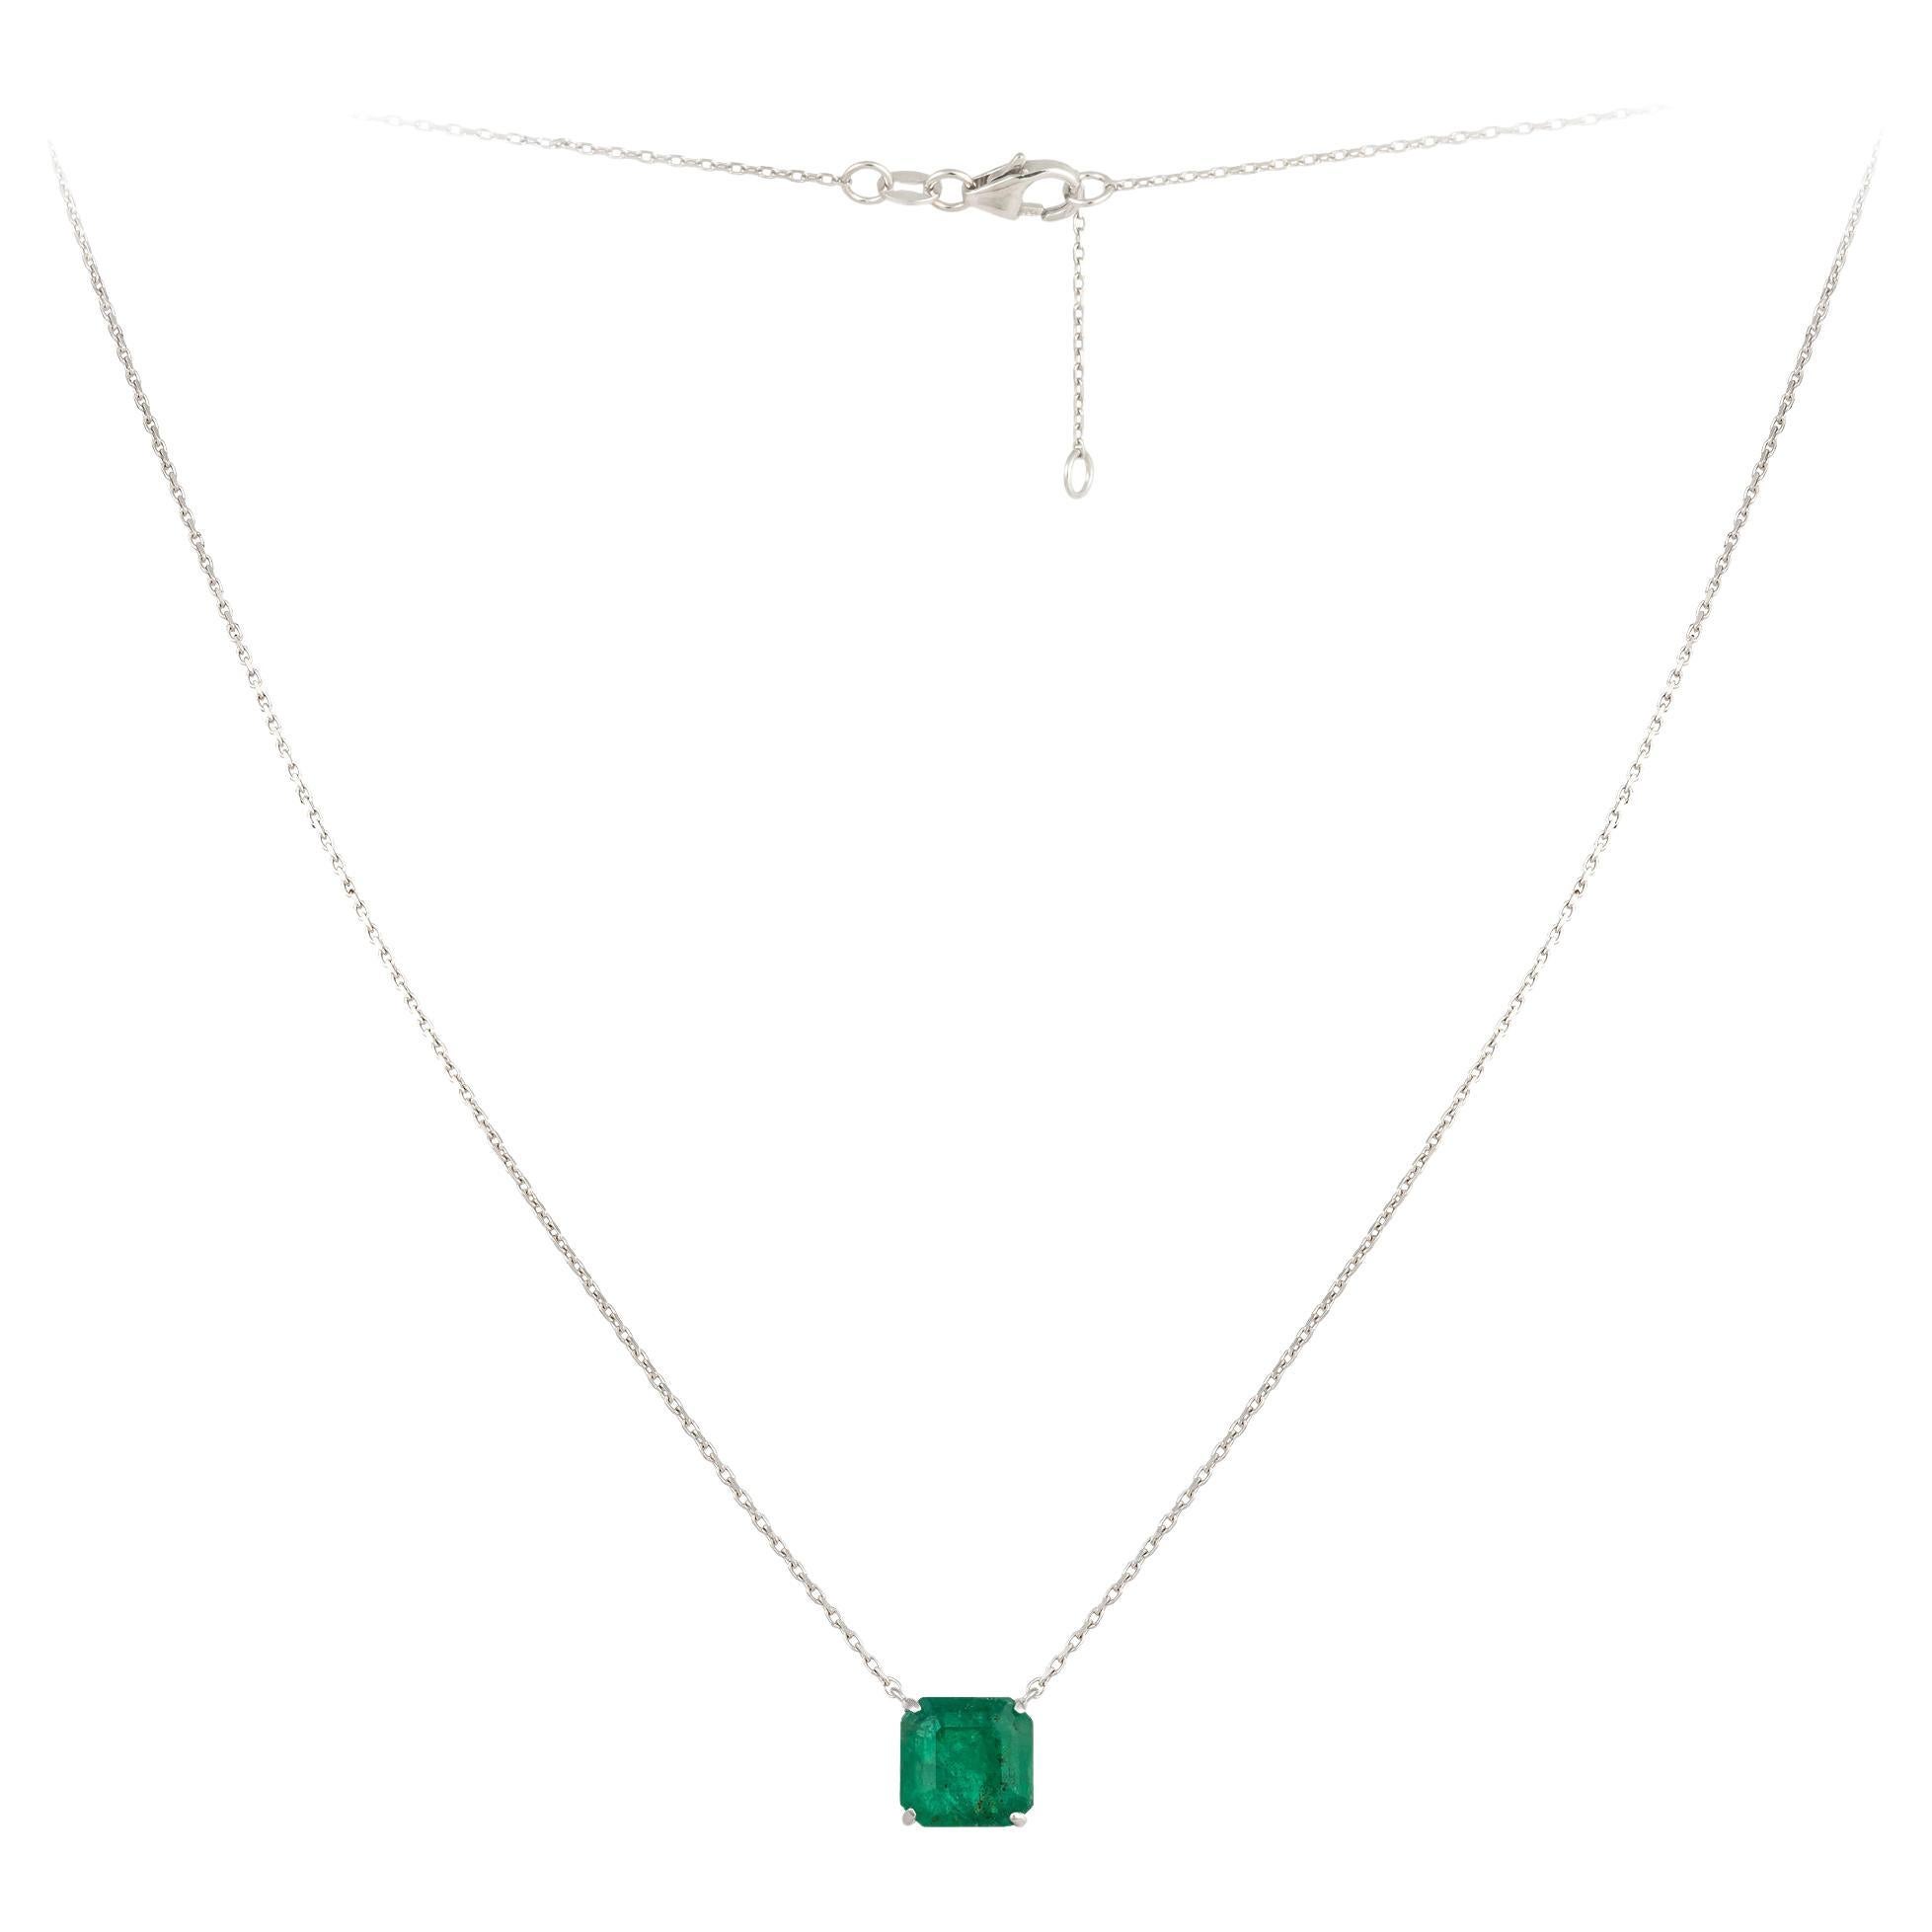 Every Day White Gold 18K Necklace Emerald Diamond For Her For Sale